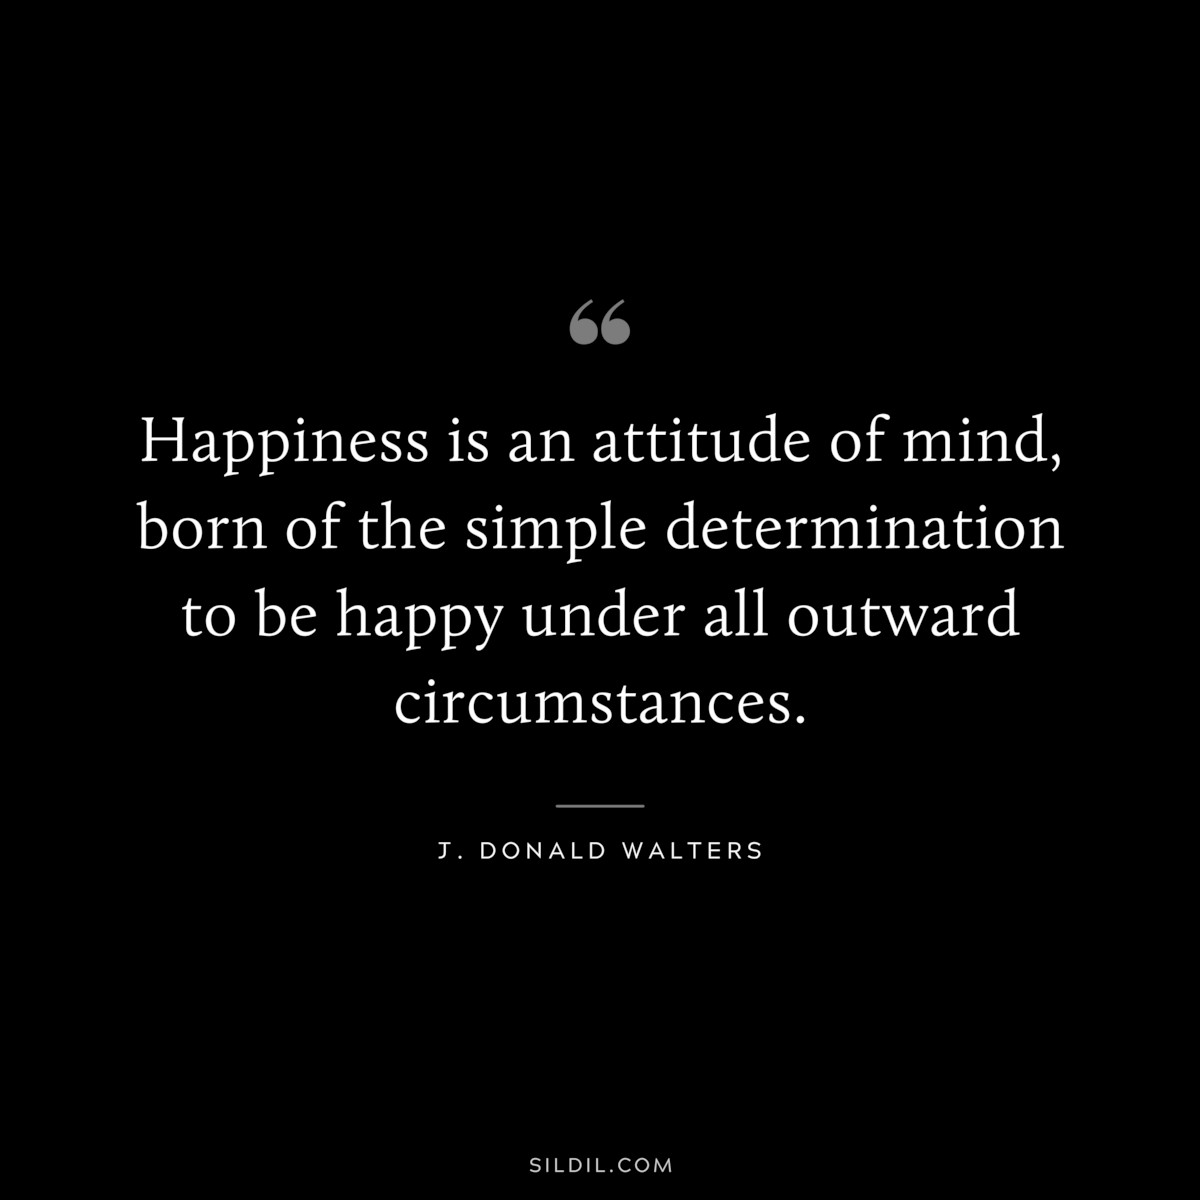 Happiness is an attitude of mind, born of the simple determination to be happy under all outward circumstances. ― J. Donald Walters